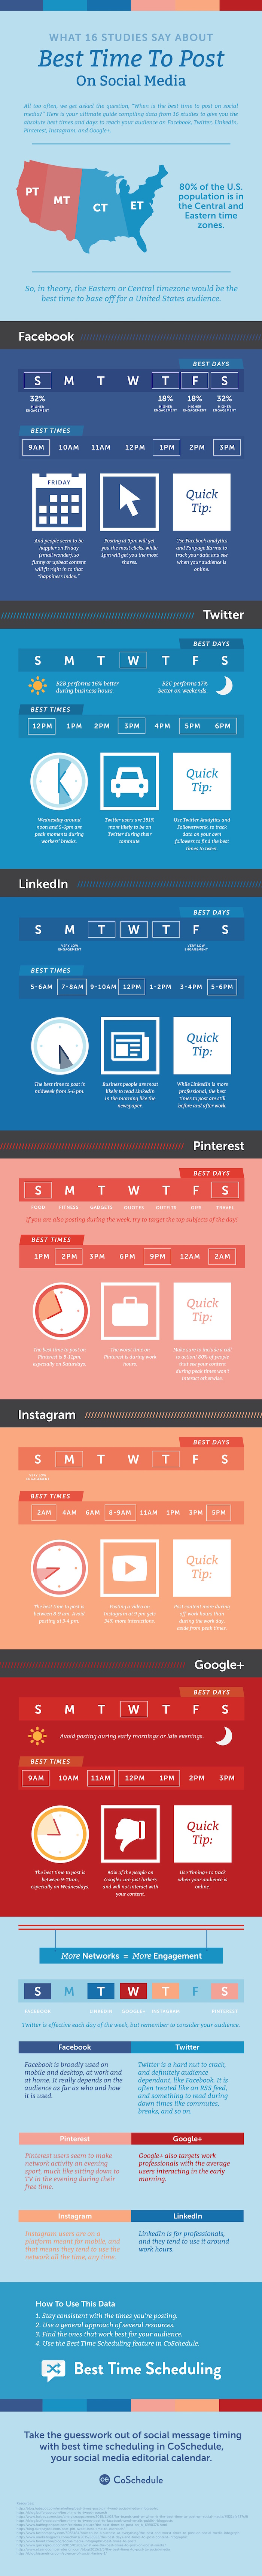 social media best times to post